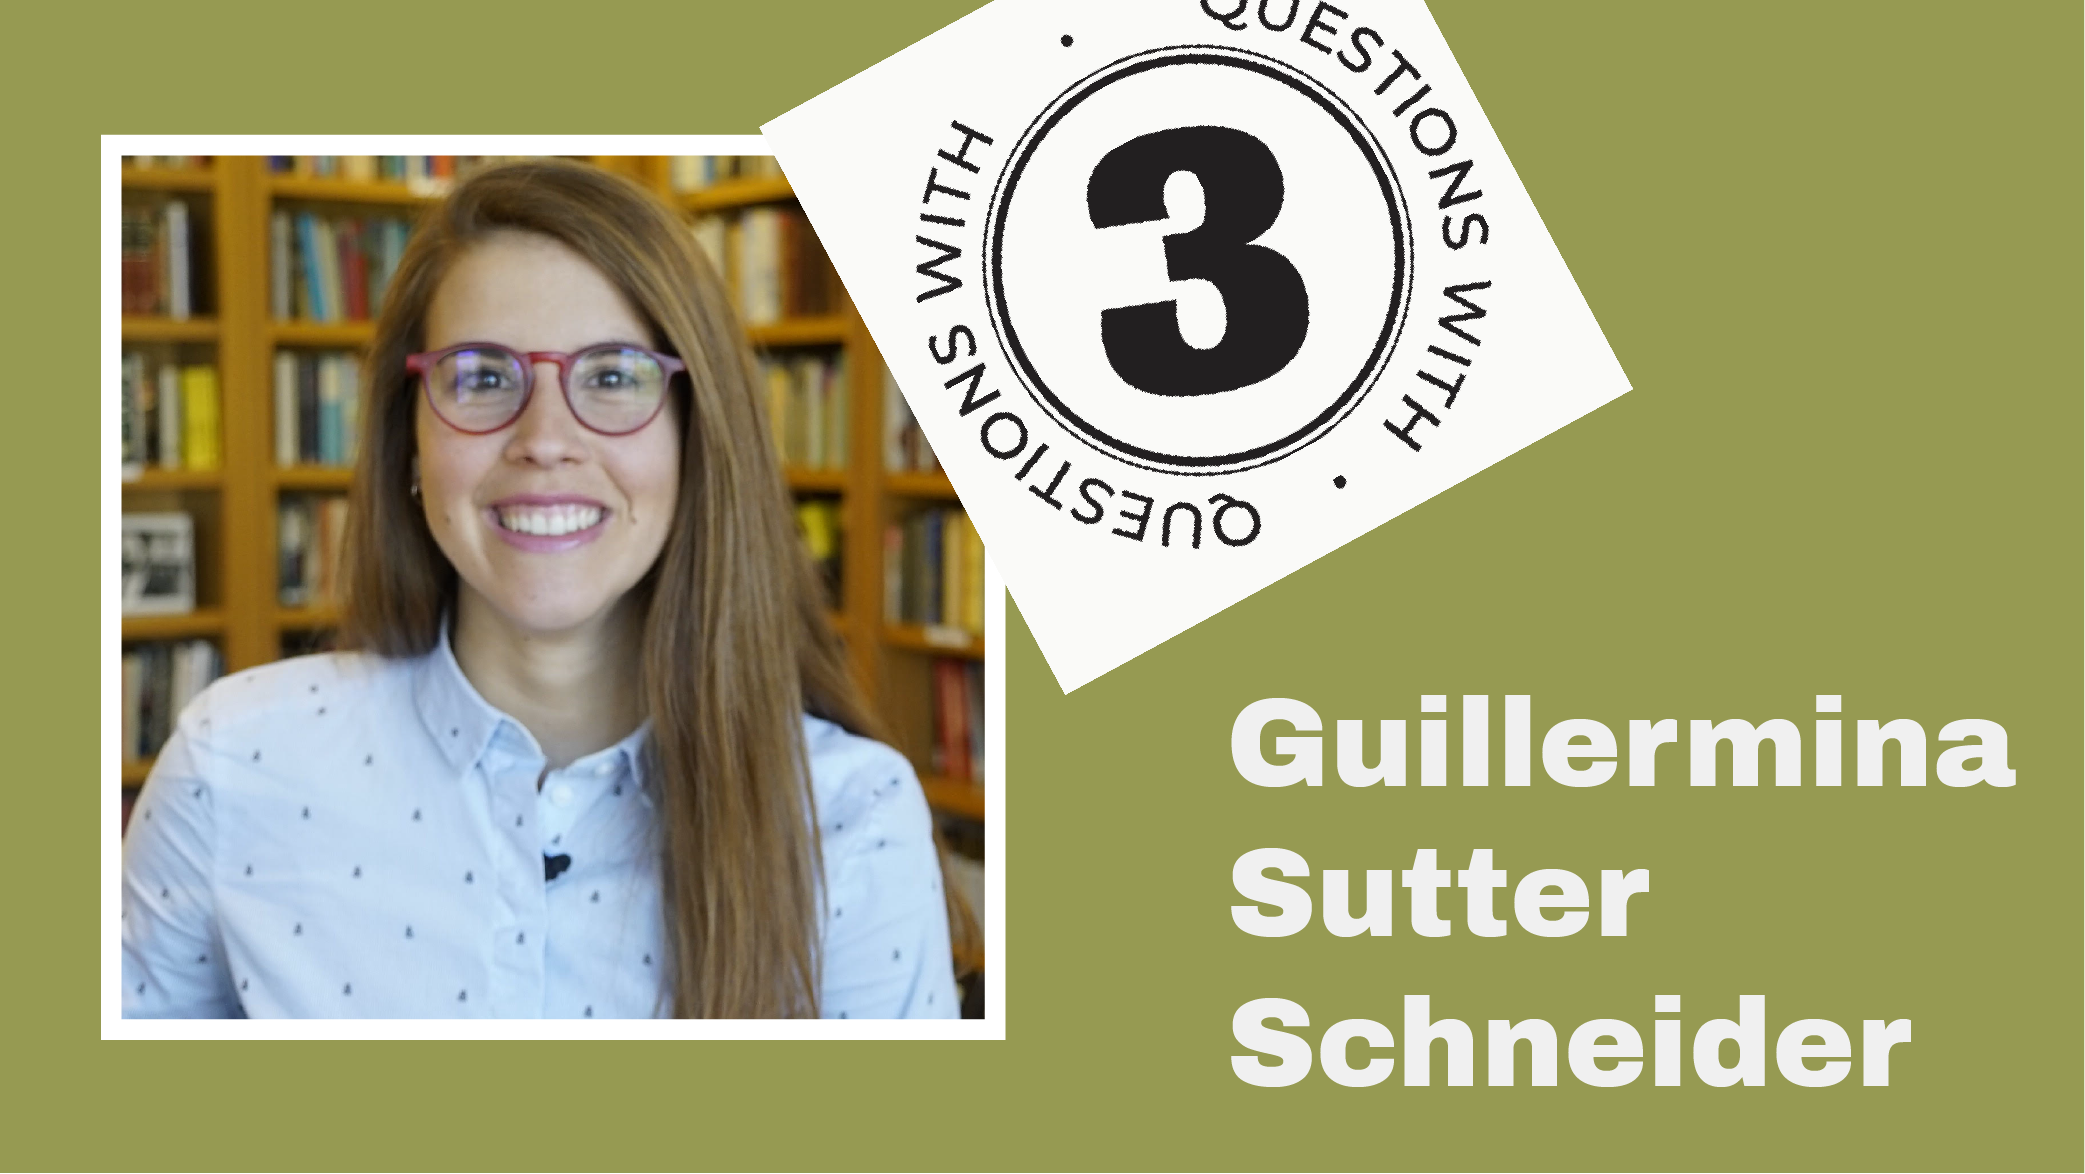 photo of smiling woman with red glasses and long brown hair in front of full bookshelves, with text "3 Questions With Guillermina Sutter Schneider"